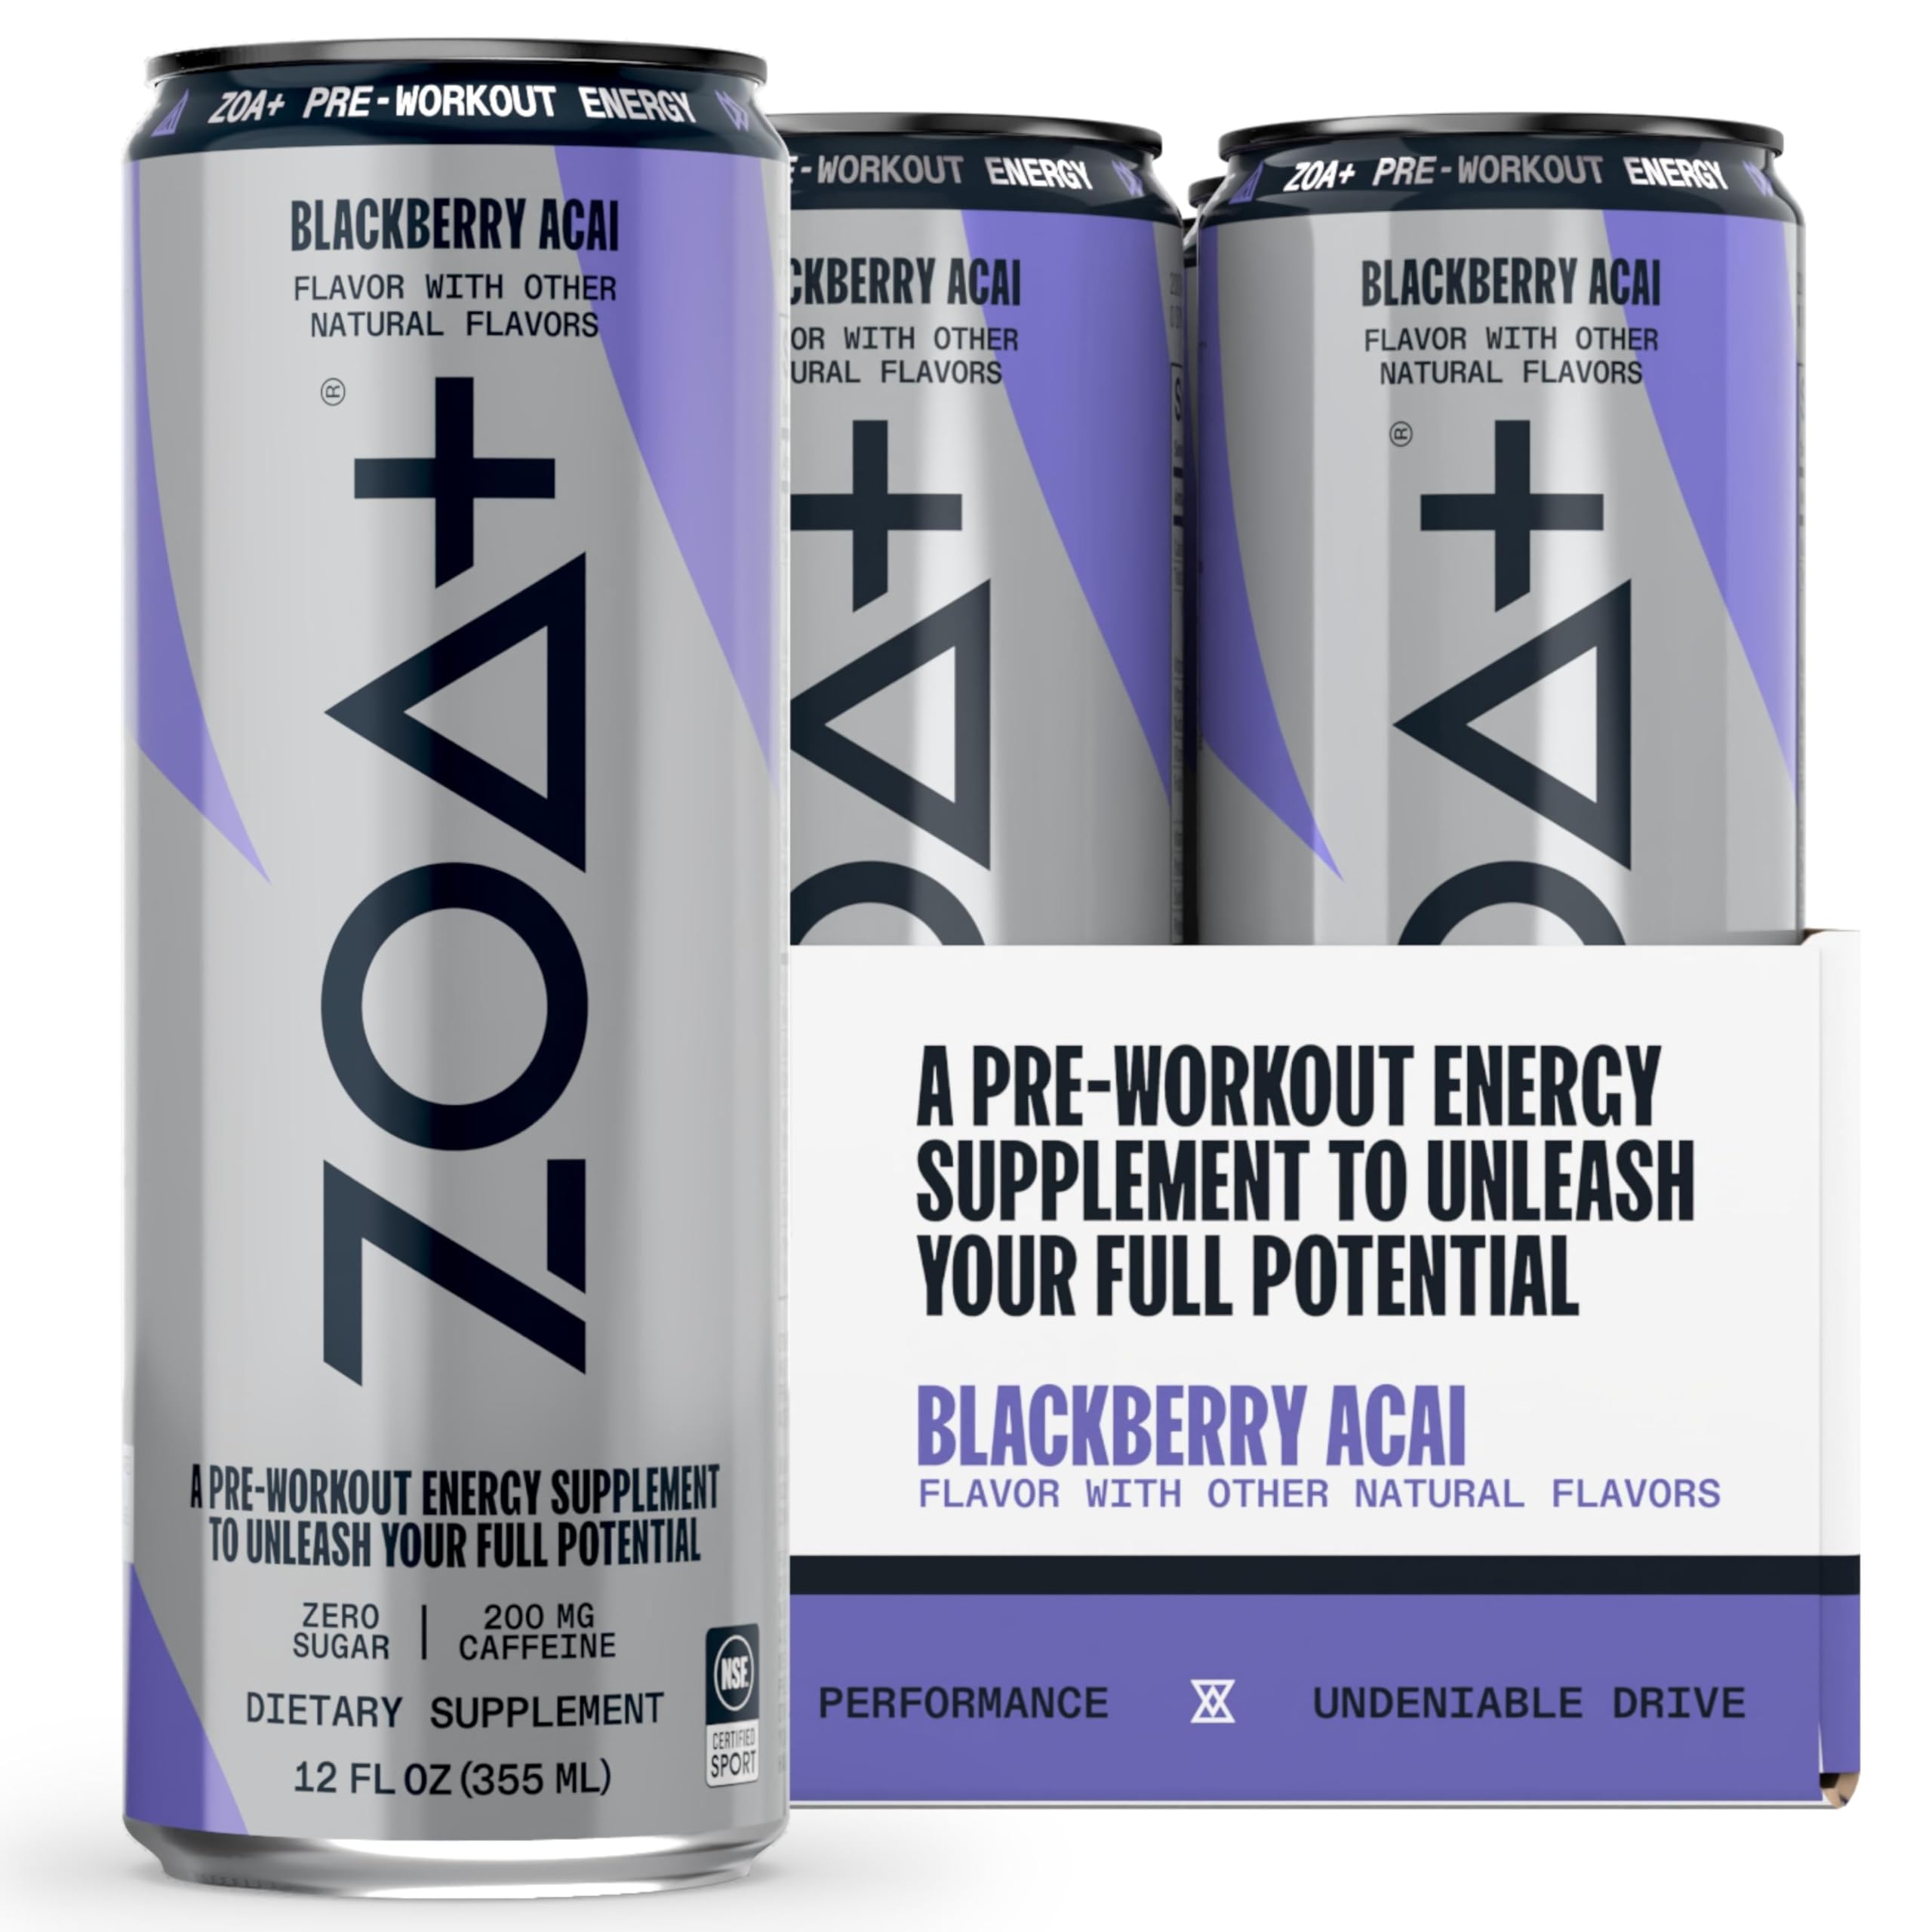 12 Cans ZOA+ Pre-Workout Energy Drink - NSF Certified for Sport with Zero Sugar, Nitric Oxide Support, B & D Vitamins, Amino Acids, and Electrolytes (BlackBerry Acai) $13.16